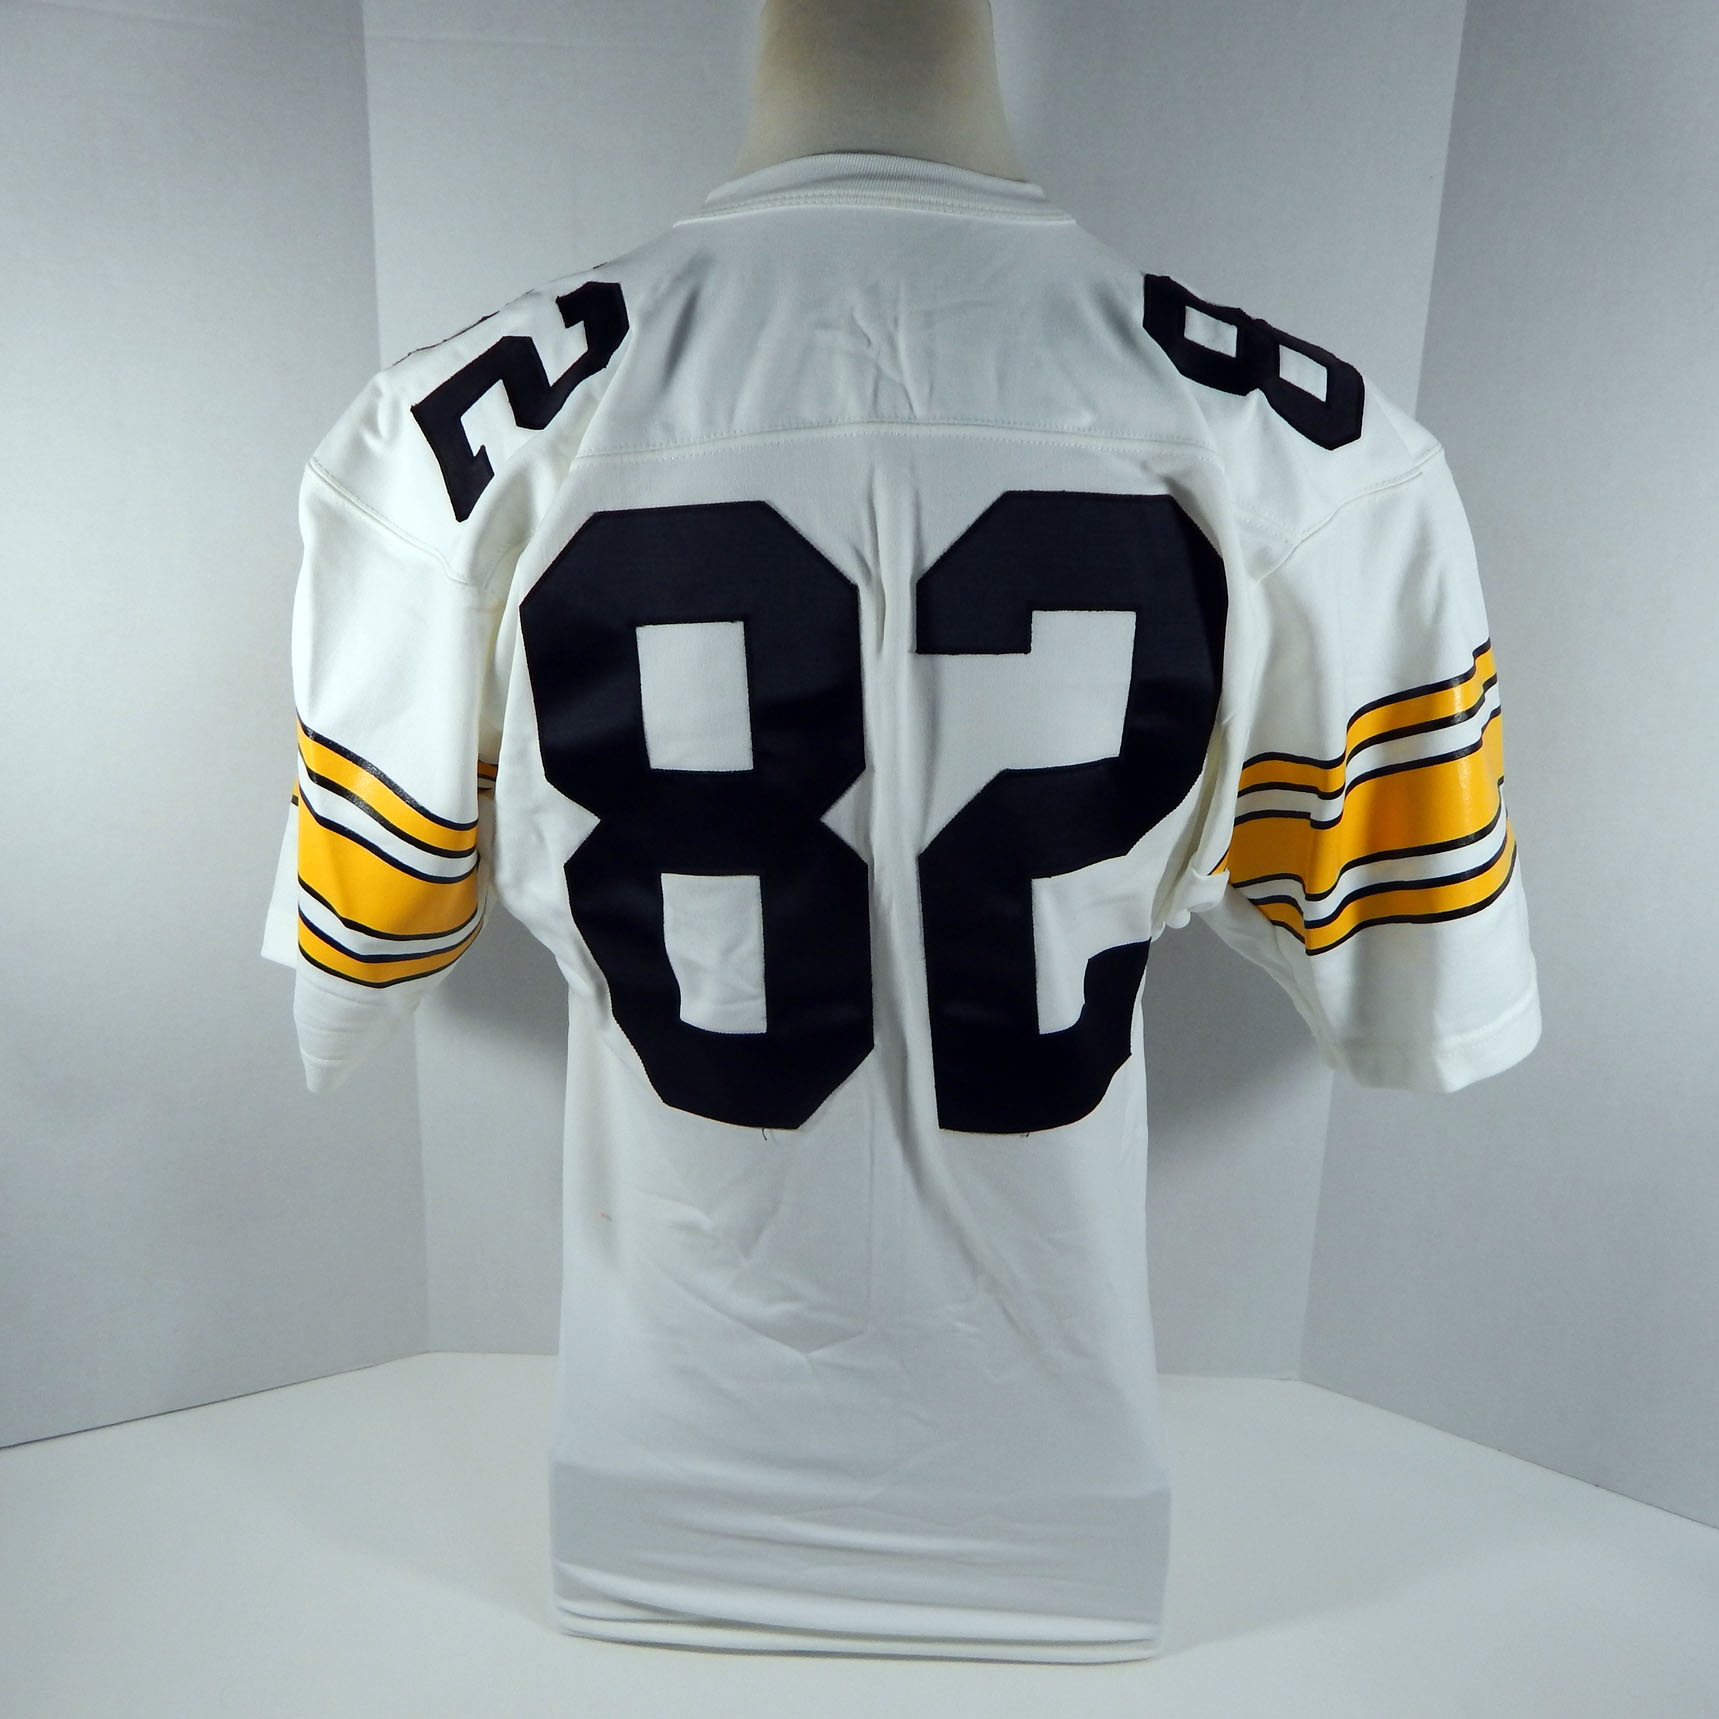 white pittsburgh steelers jersey